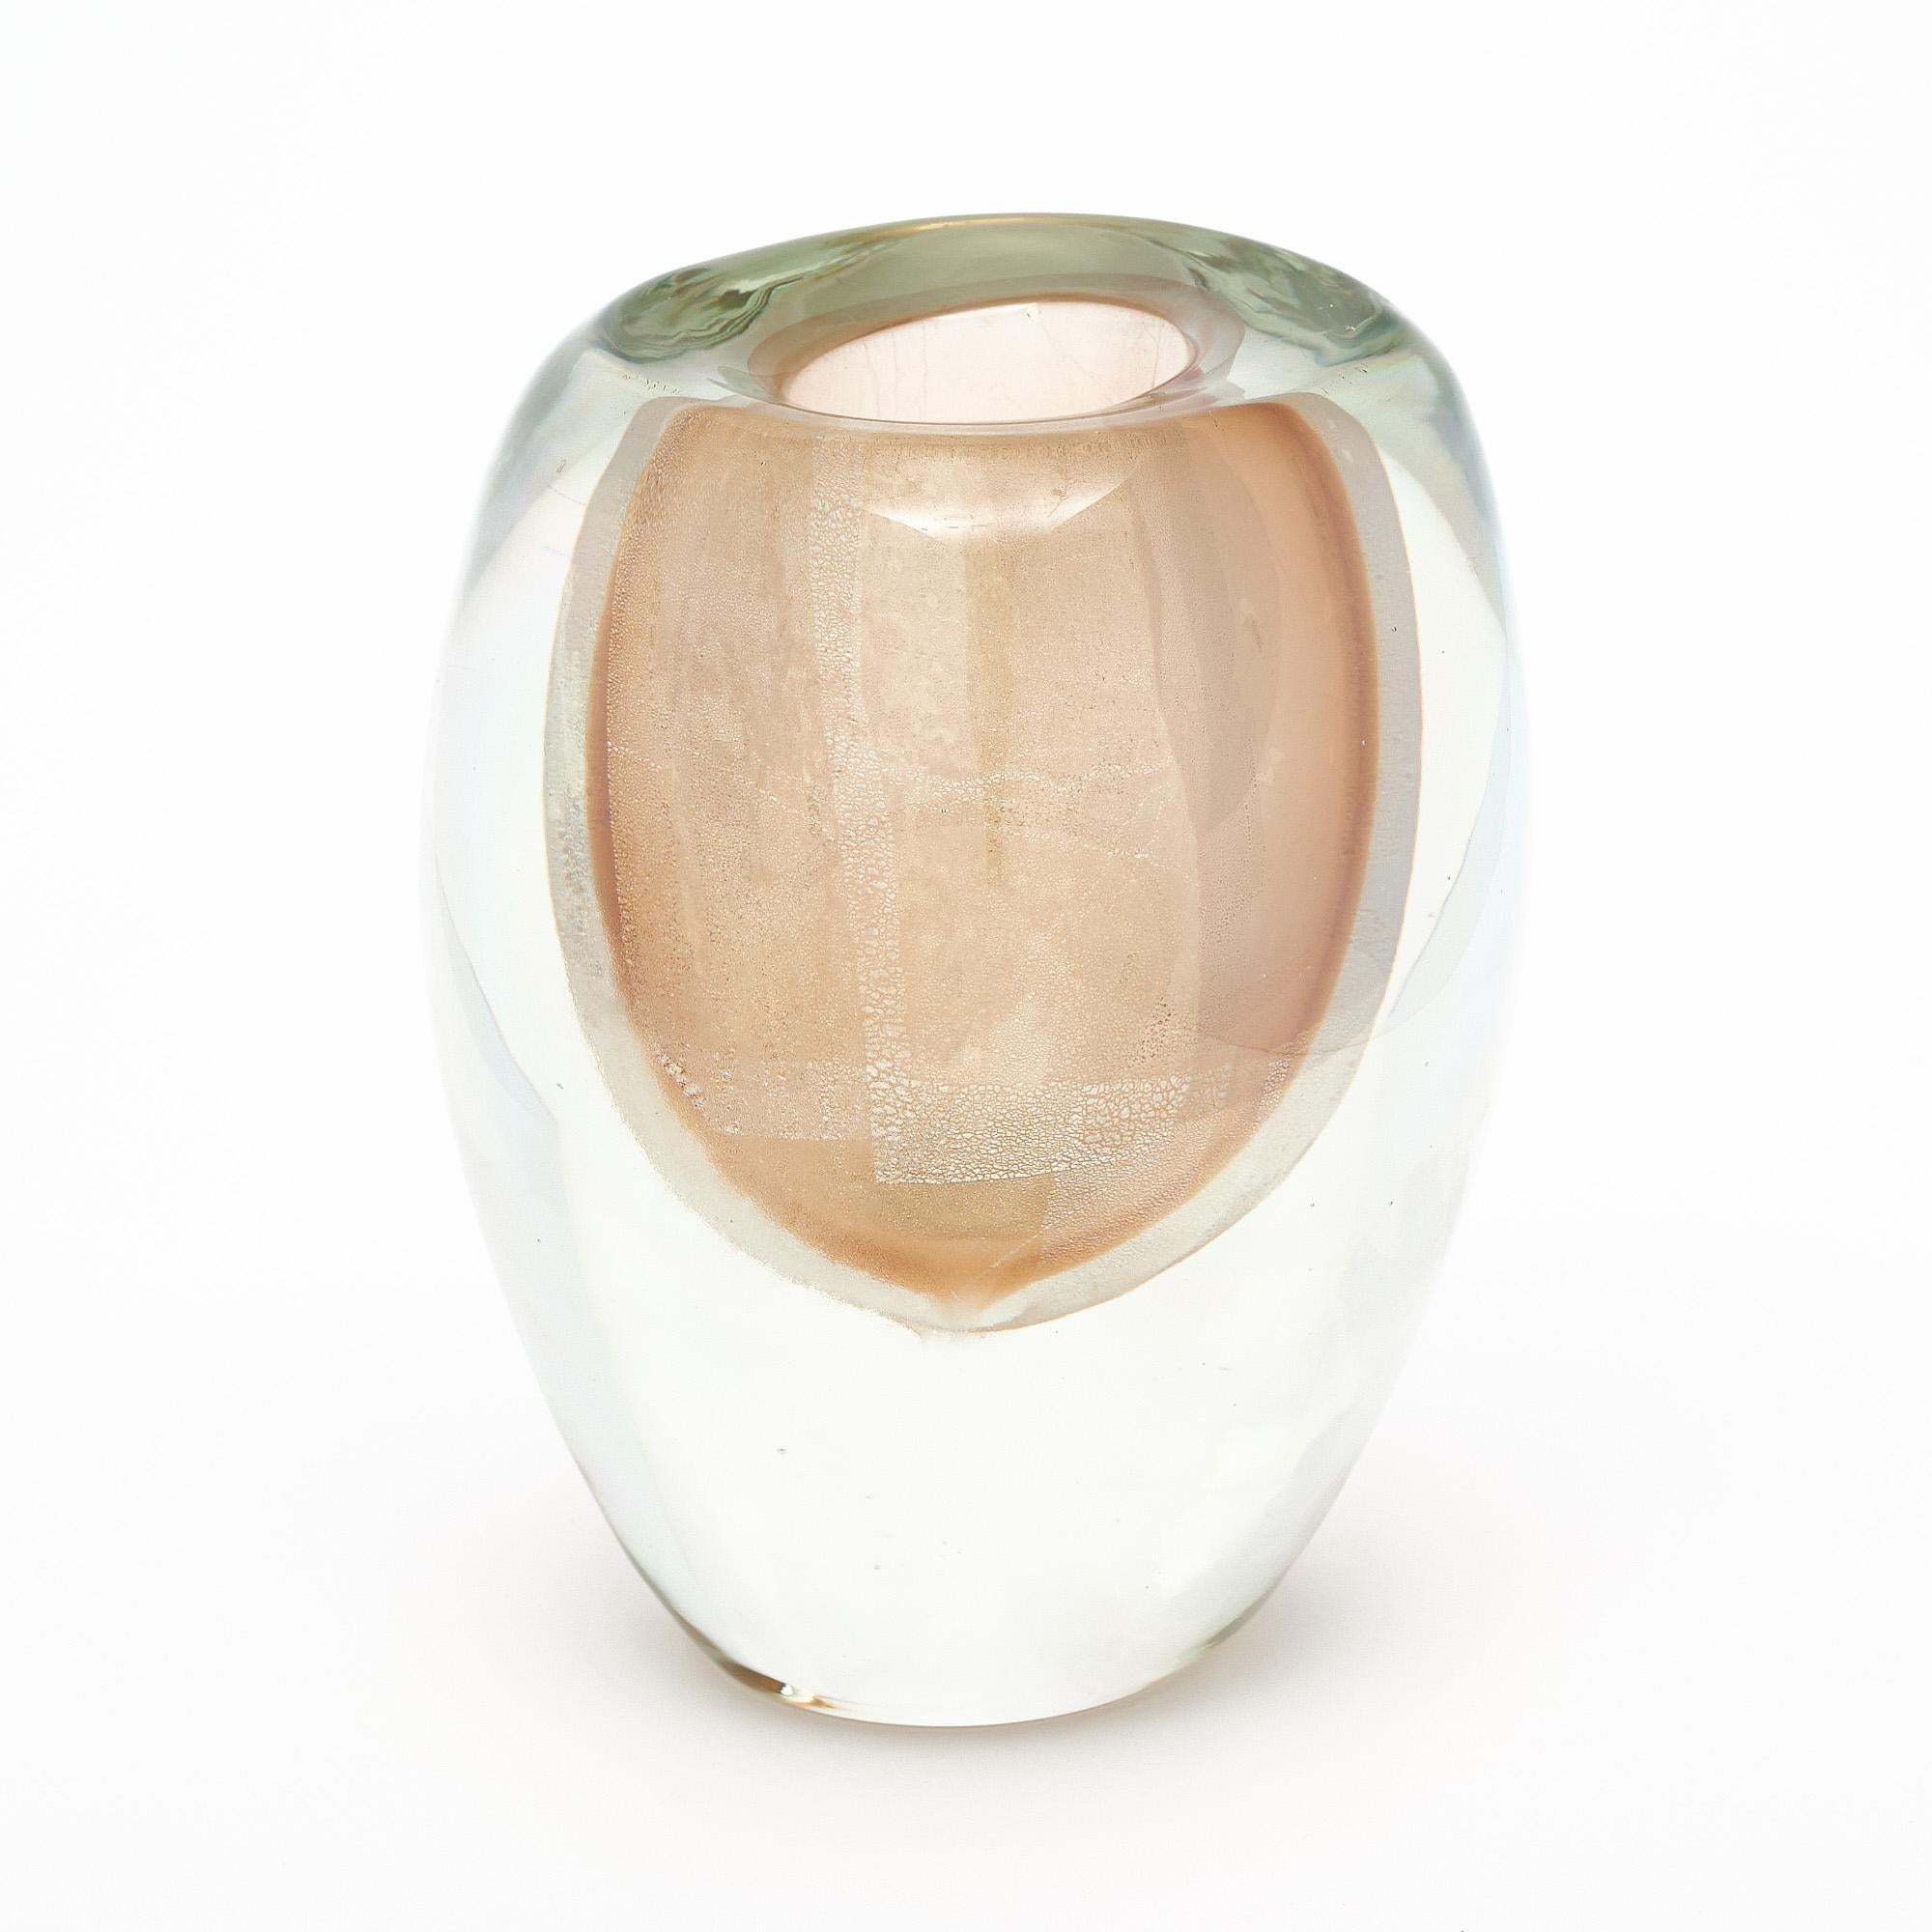 Vase from Murano, Italy made of hand-blown glass using the sommerso and avventurina blowing techniques. 23 carat gold is fused within the glass in the avventurina process. Then the piece is blown using the sommerso technique which involves immersing